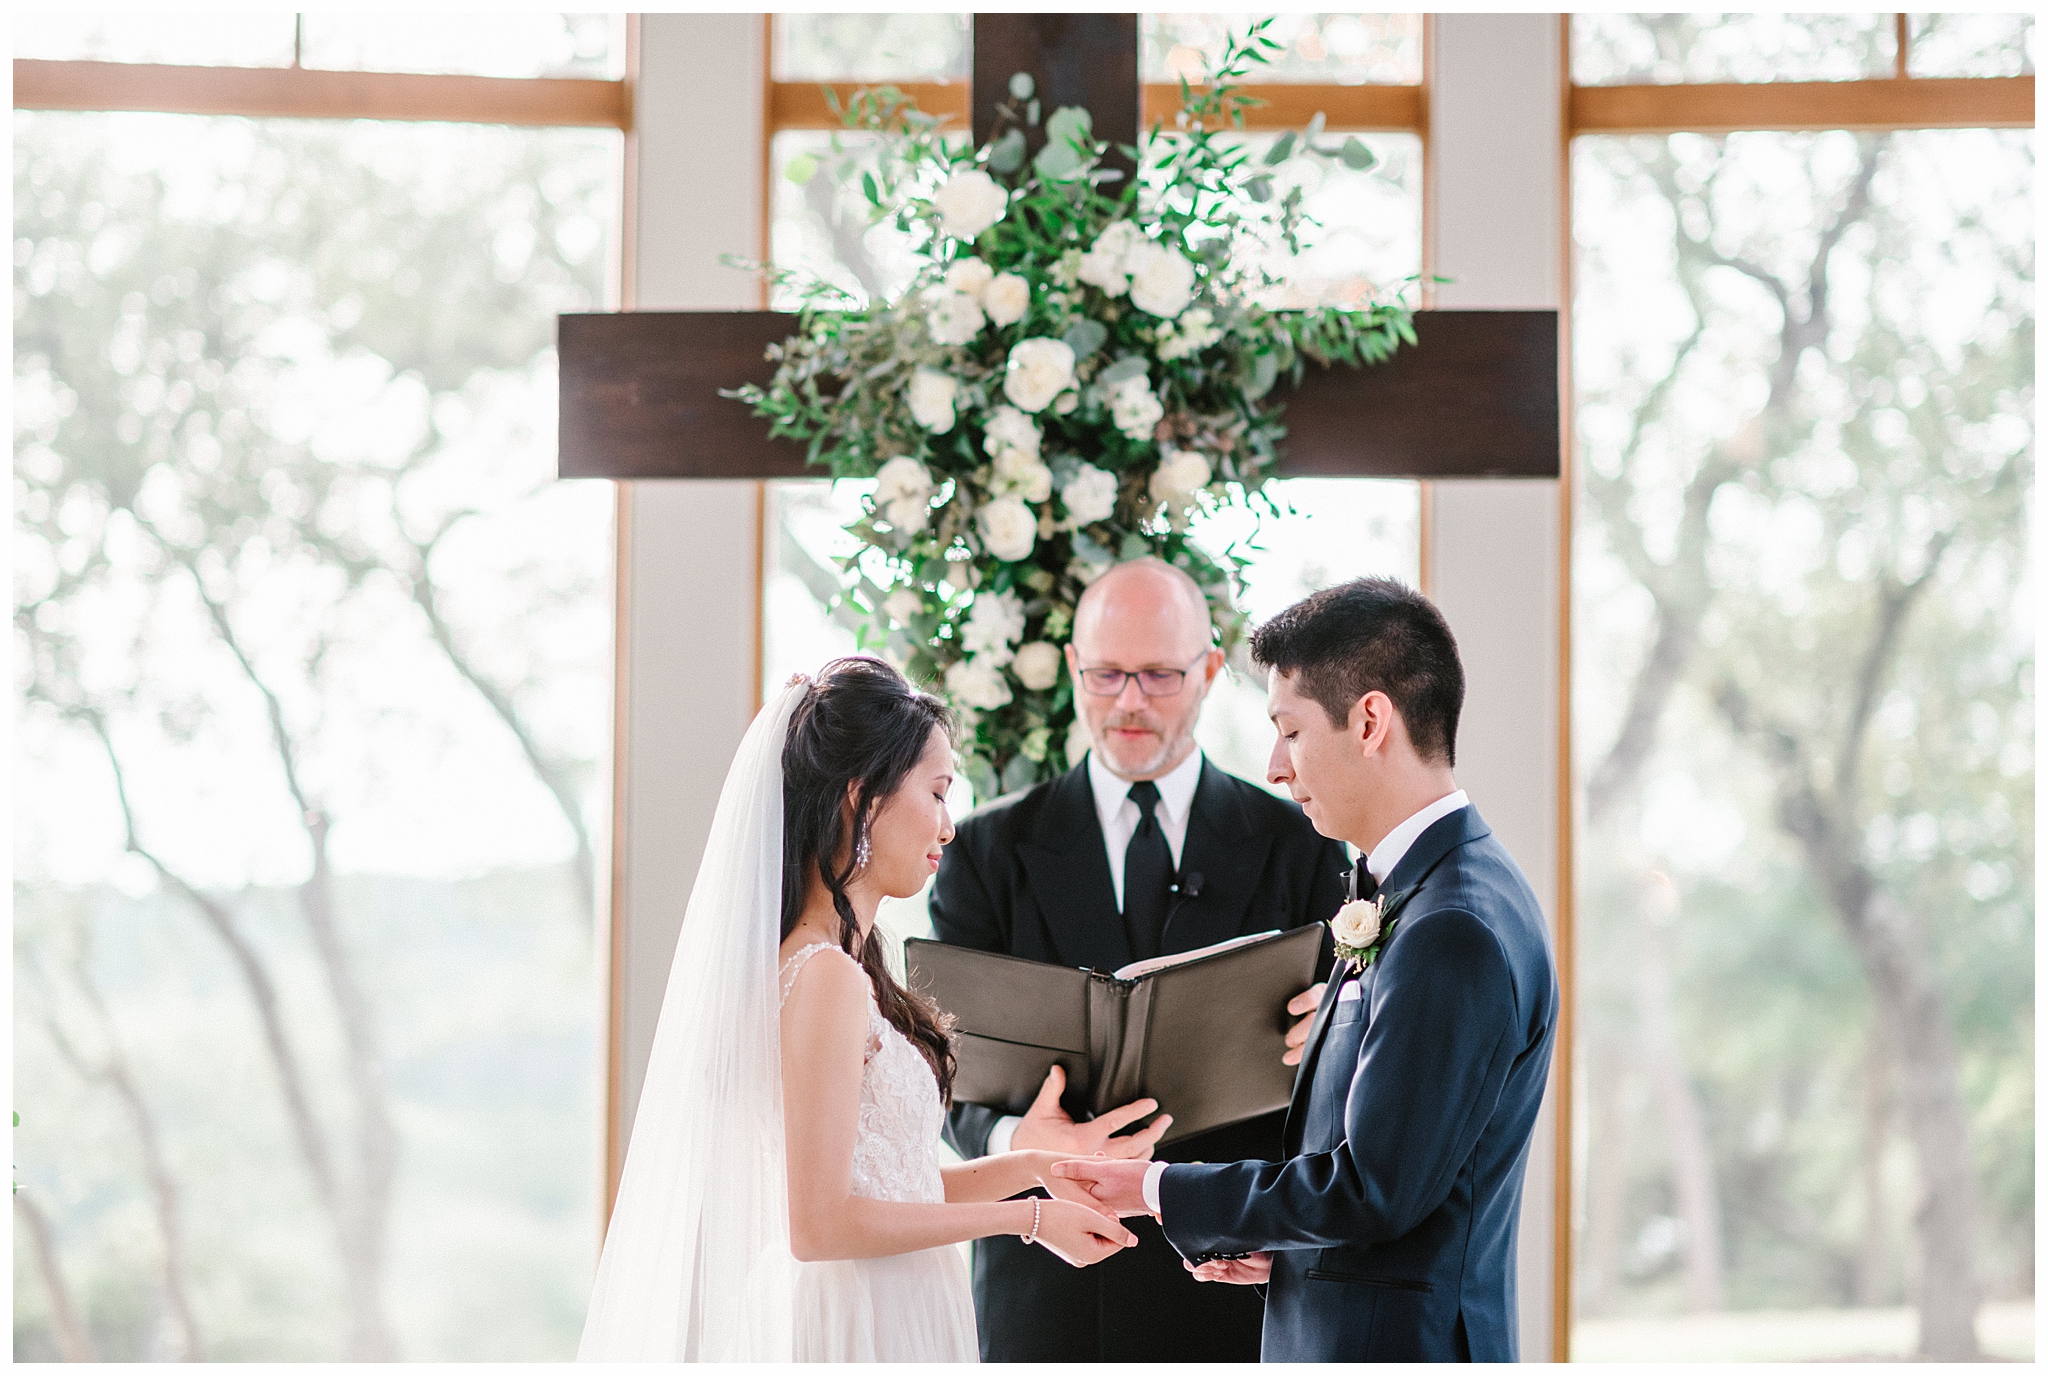 Bride and Groom Exchanging Rings During Wedding Ceremony